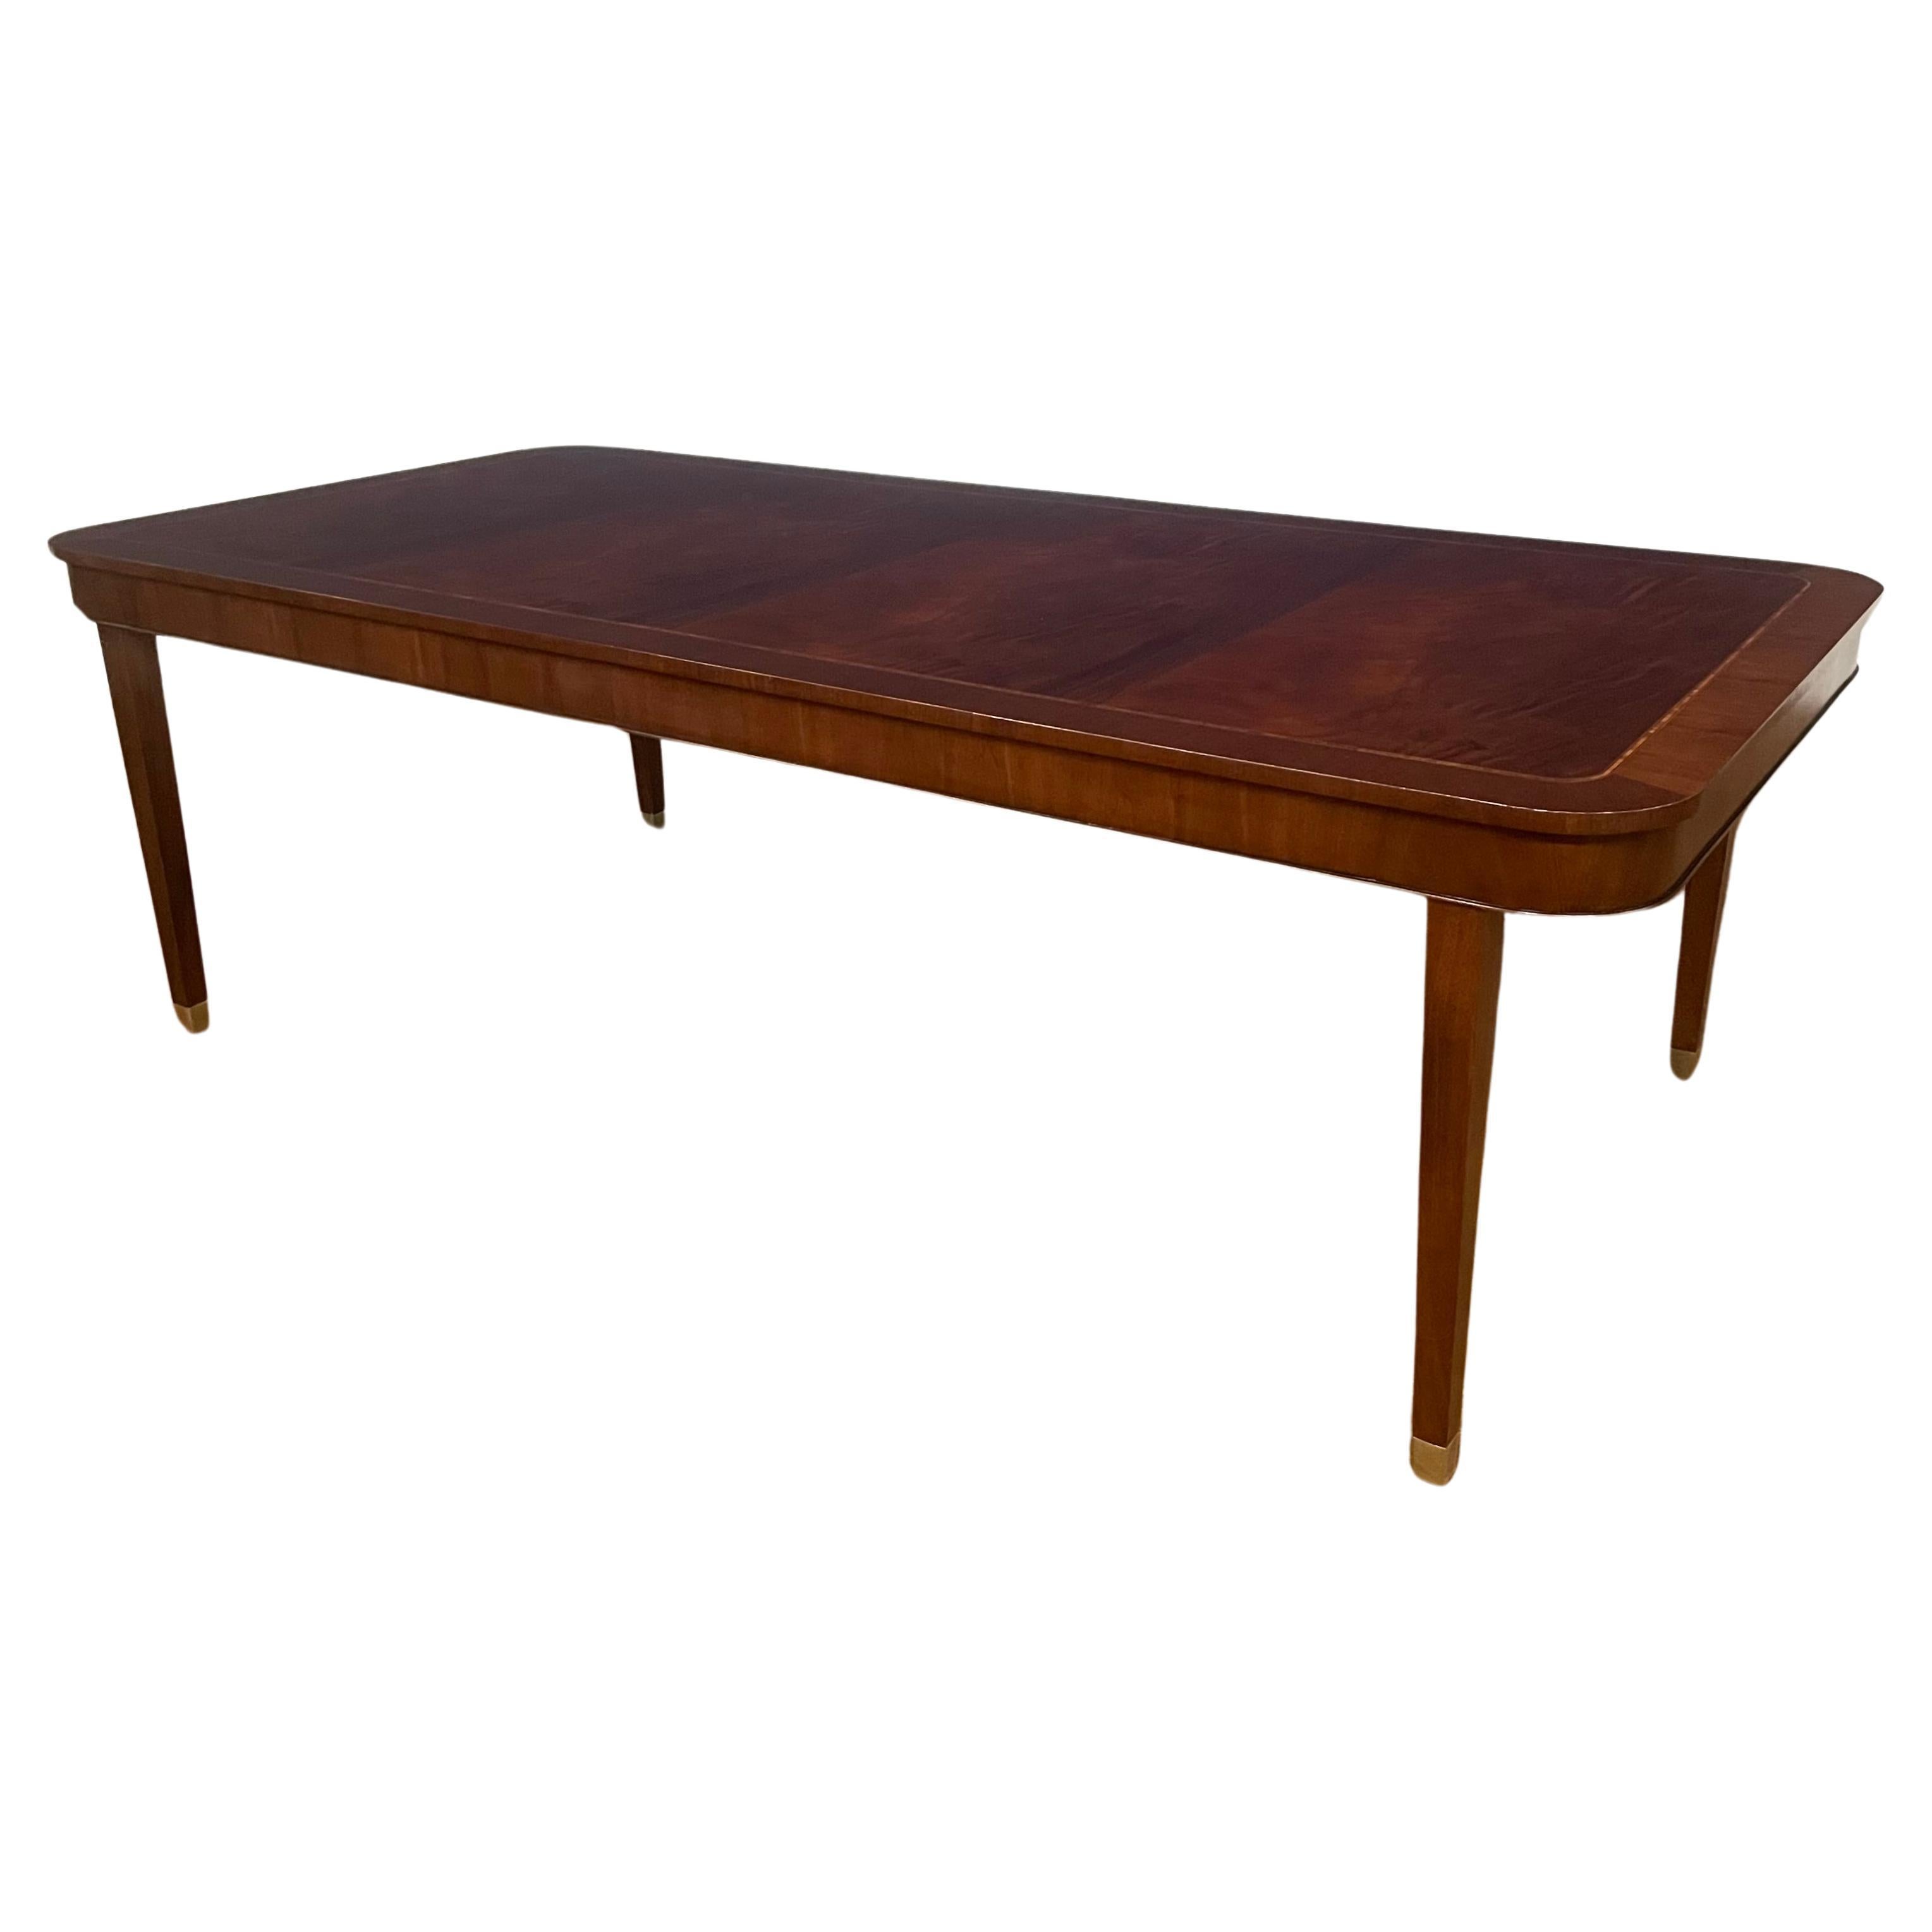 Hepplewhite Style Mahogany Four Leg Dining Table - Made-To-Order  For Sale